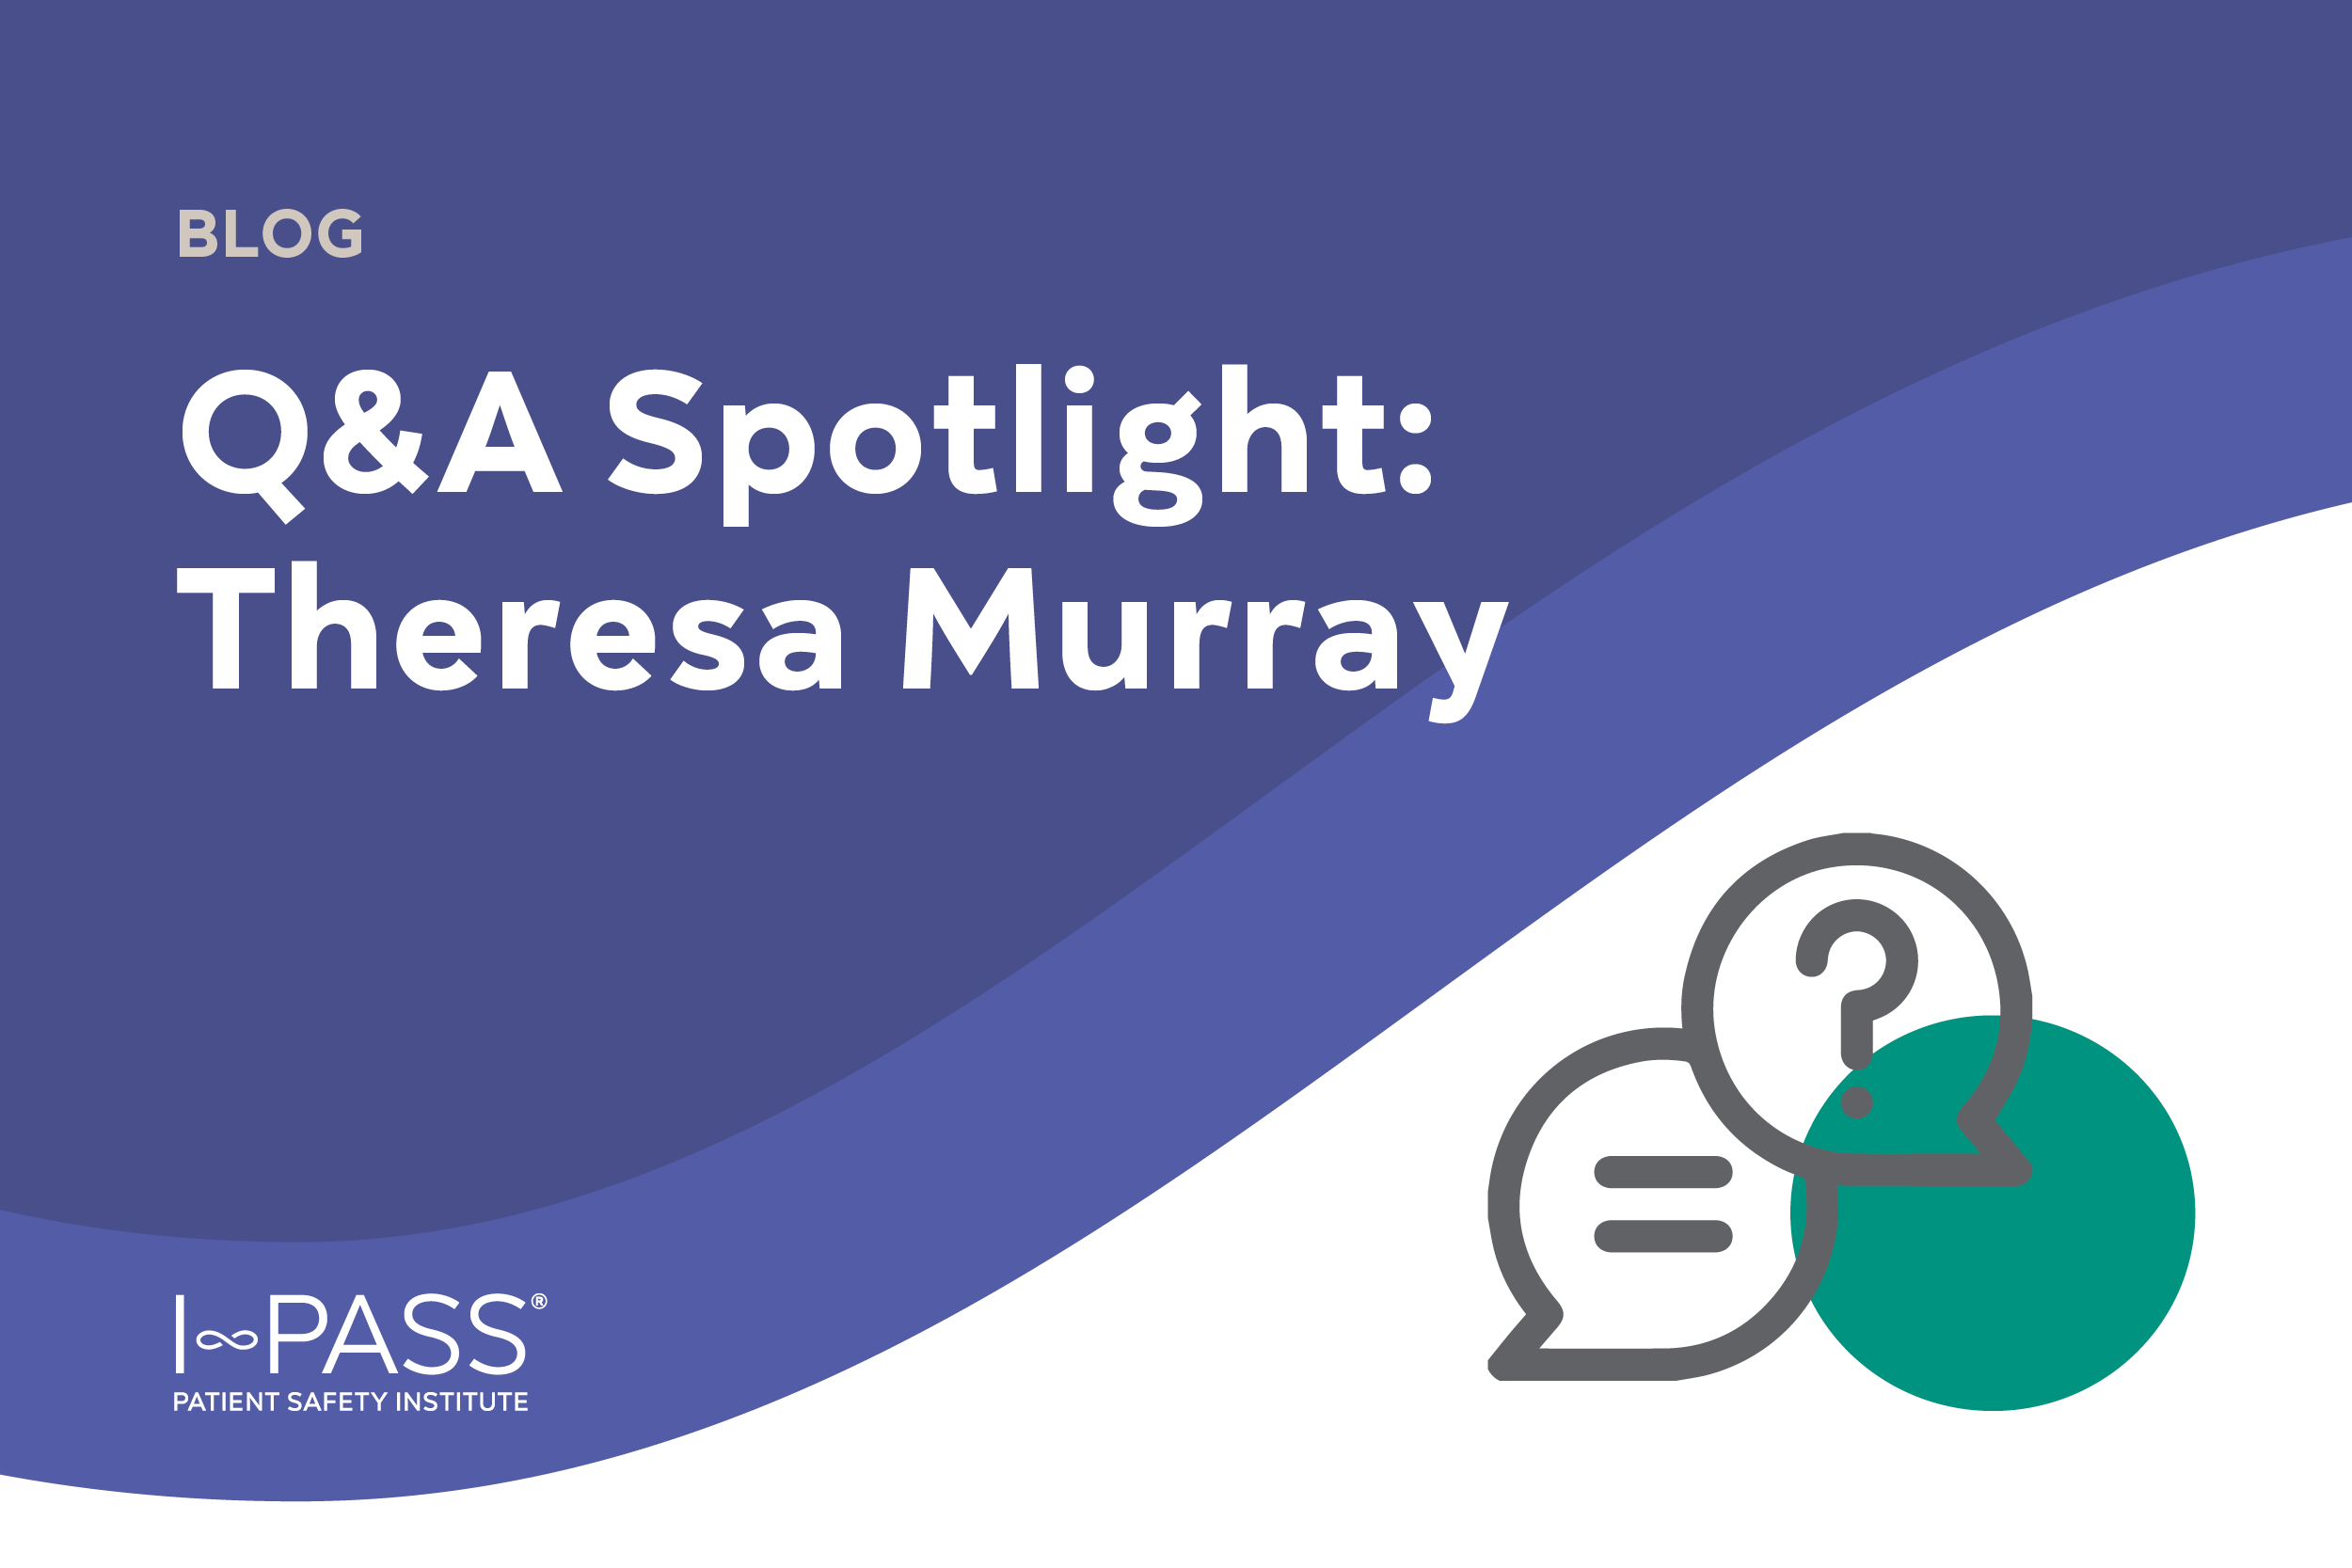 Q&A Spotlight with Theresa Murray